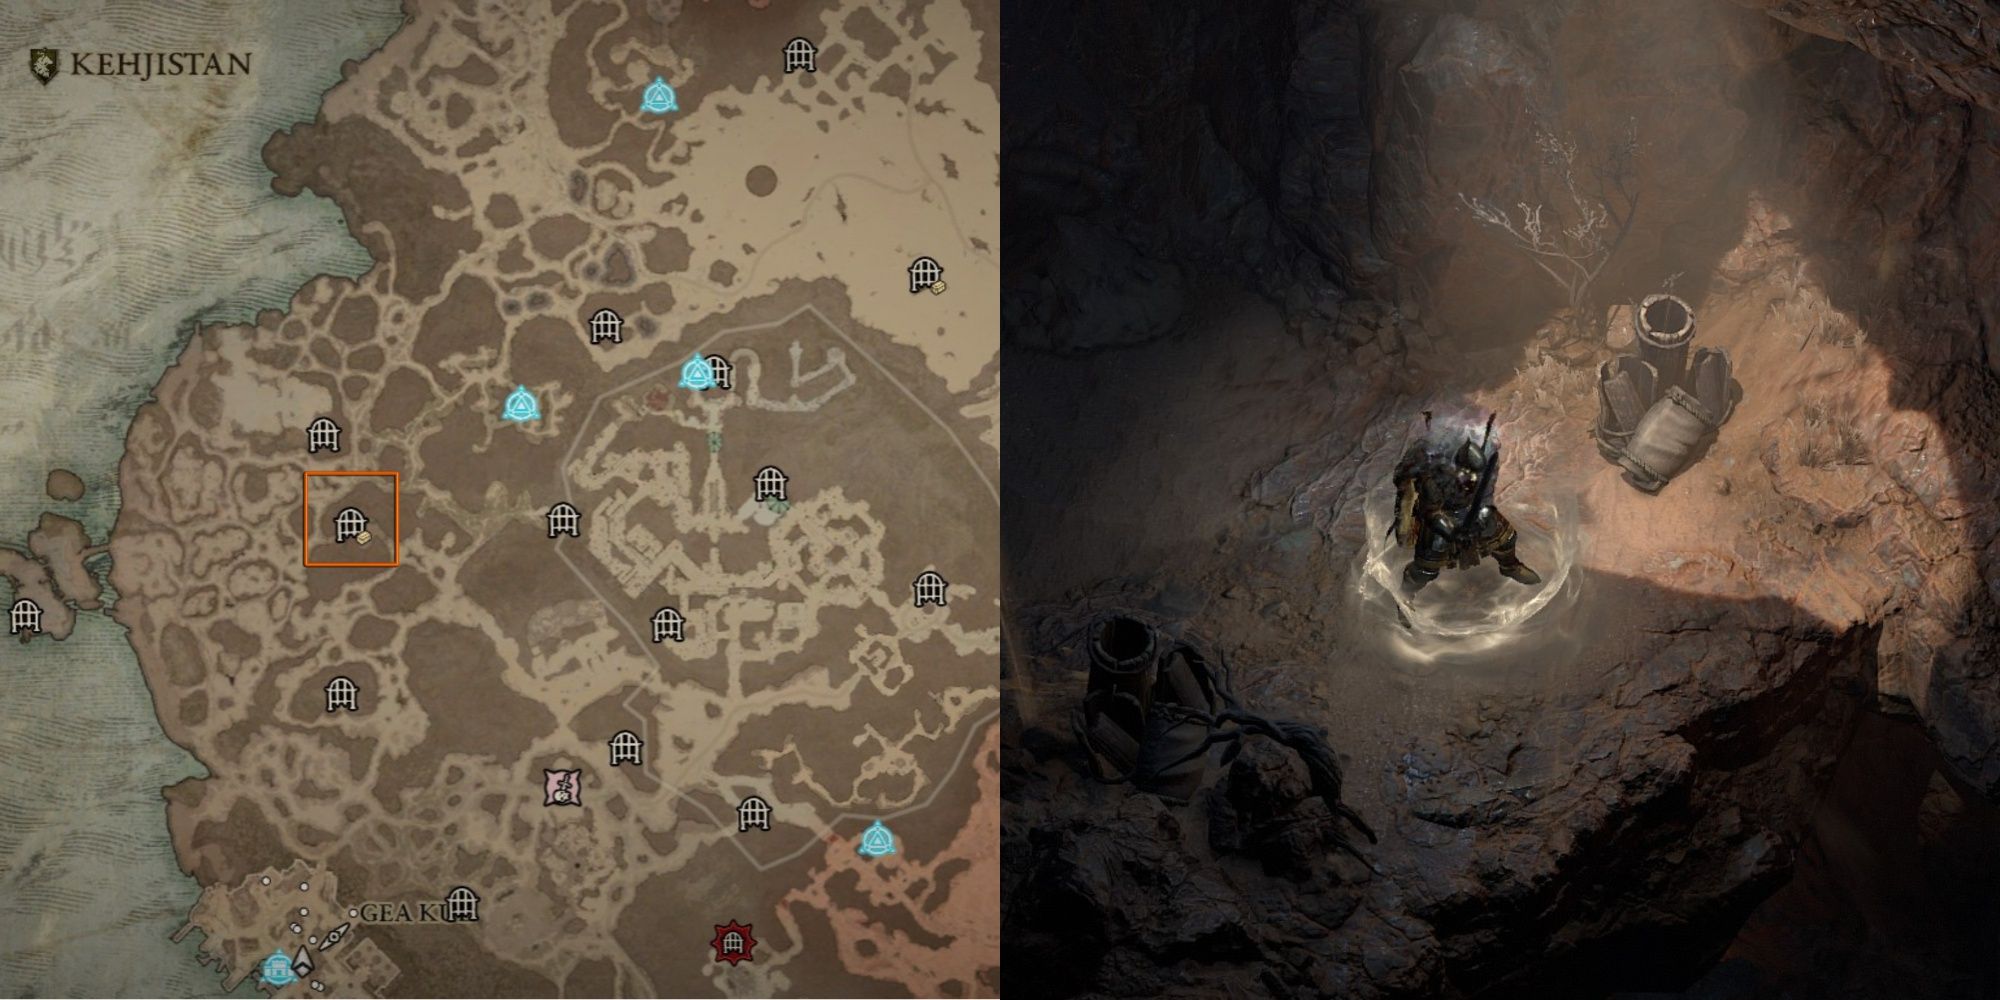 Location of Uldur's Cave Dungeon on the map and interior of Kehjistan in Diablo 4